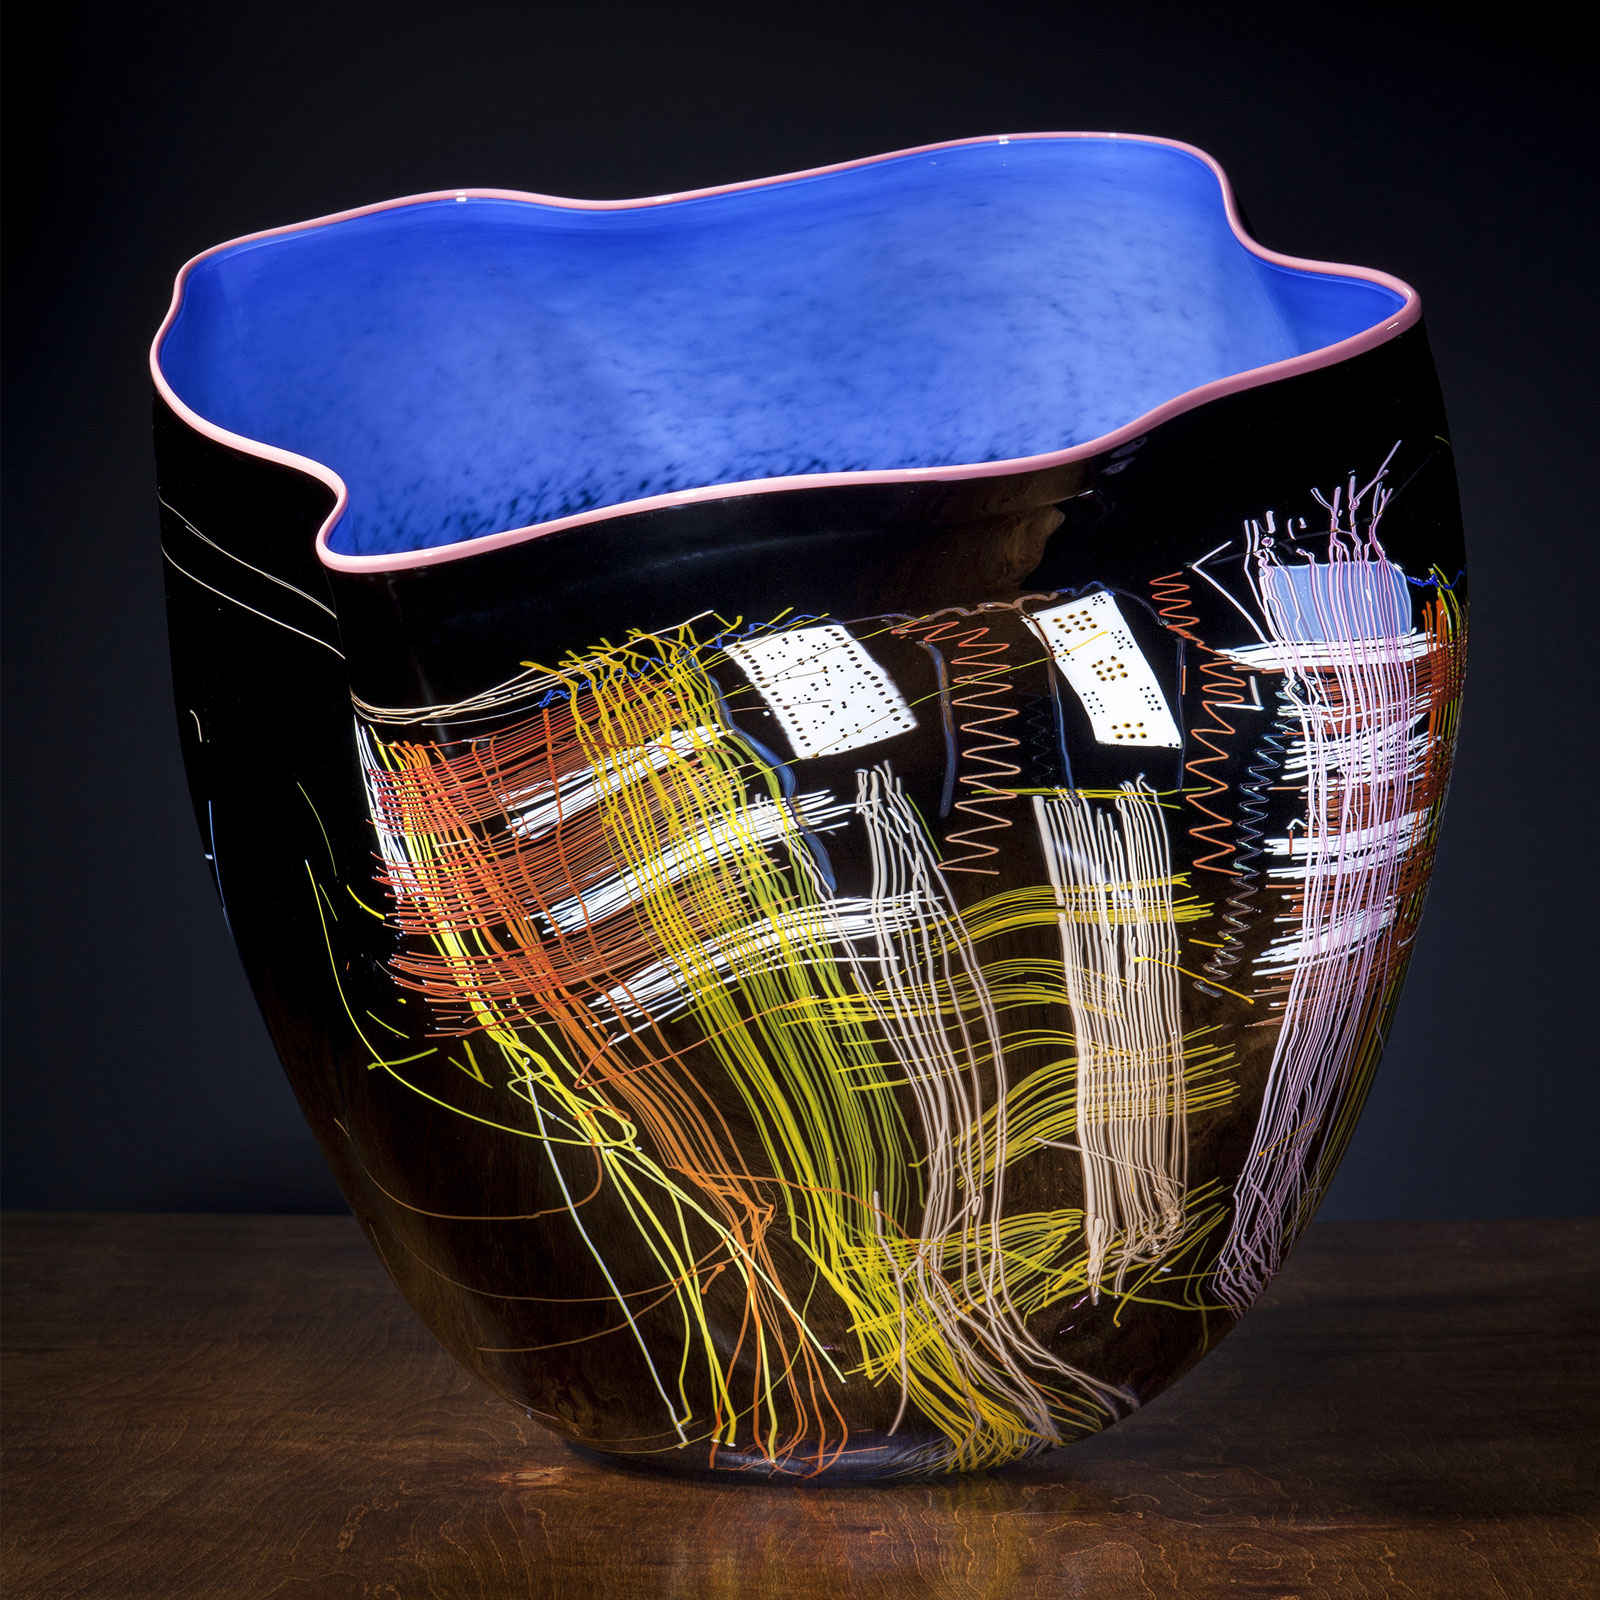 Black Lapis Soft Cylinder with Blush Lip Wrap, 2013 by Dale Chihuly